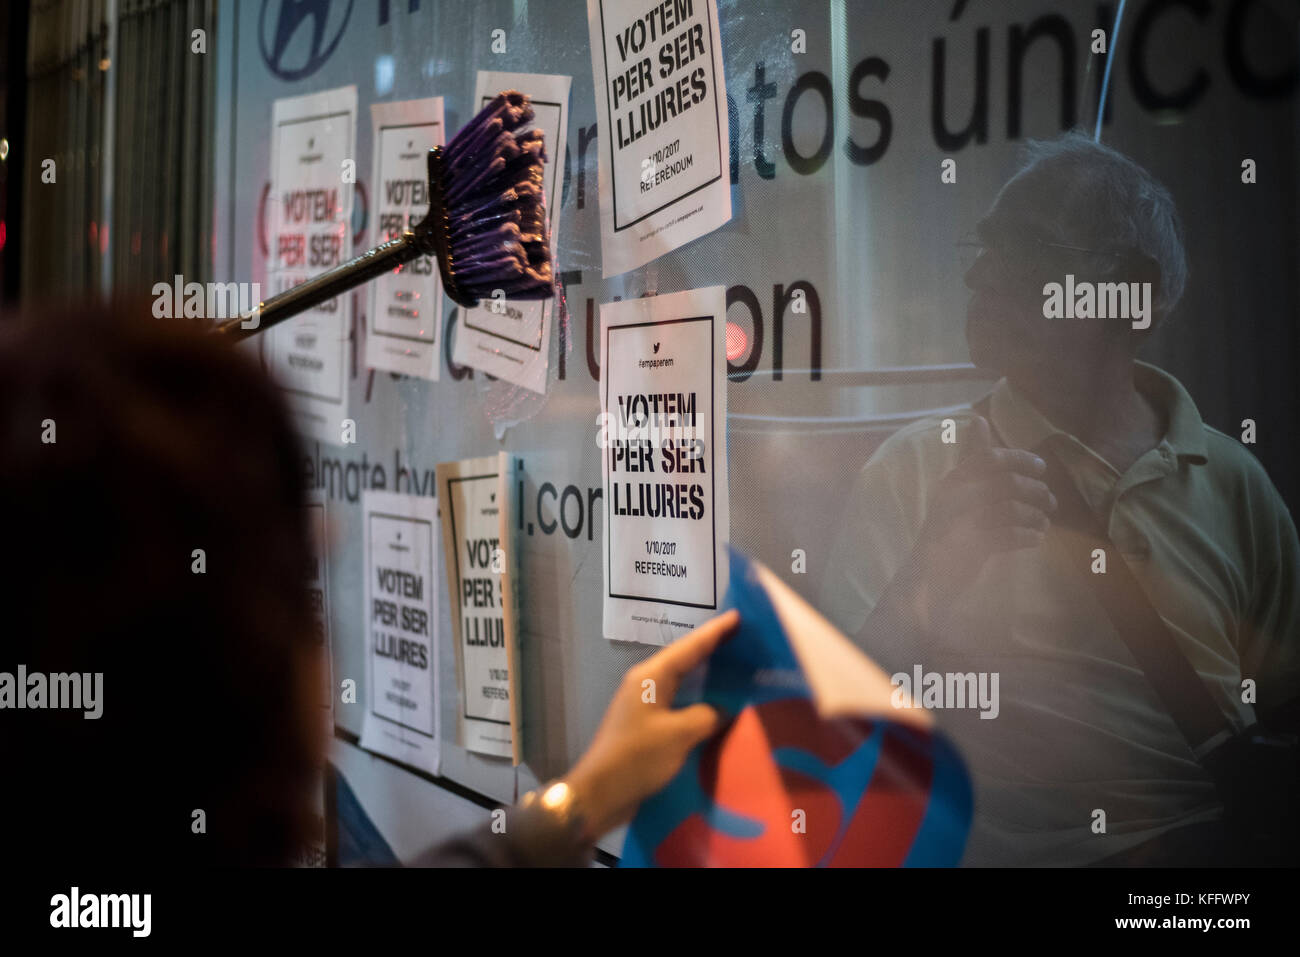 Supporters of the referendum stick posters on a bus. Credit: Alamy / Carles Desfilis Stock Photo